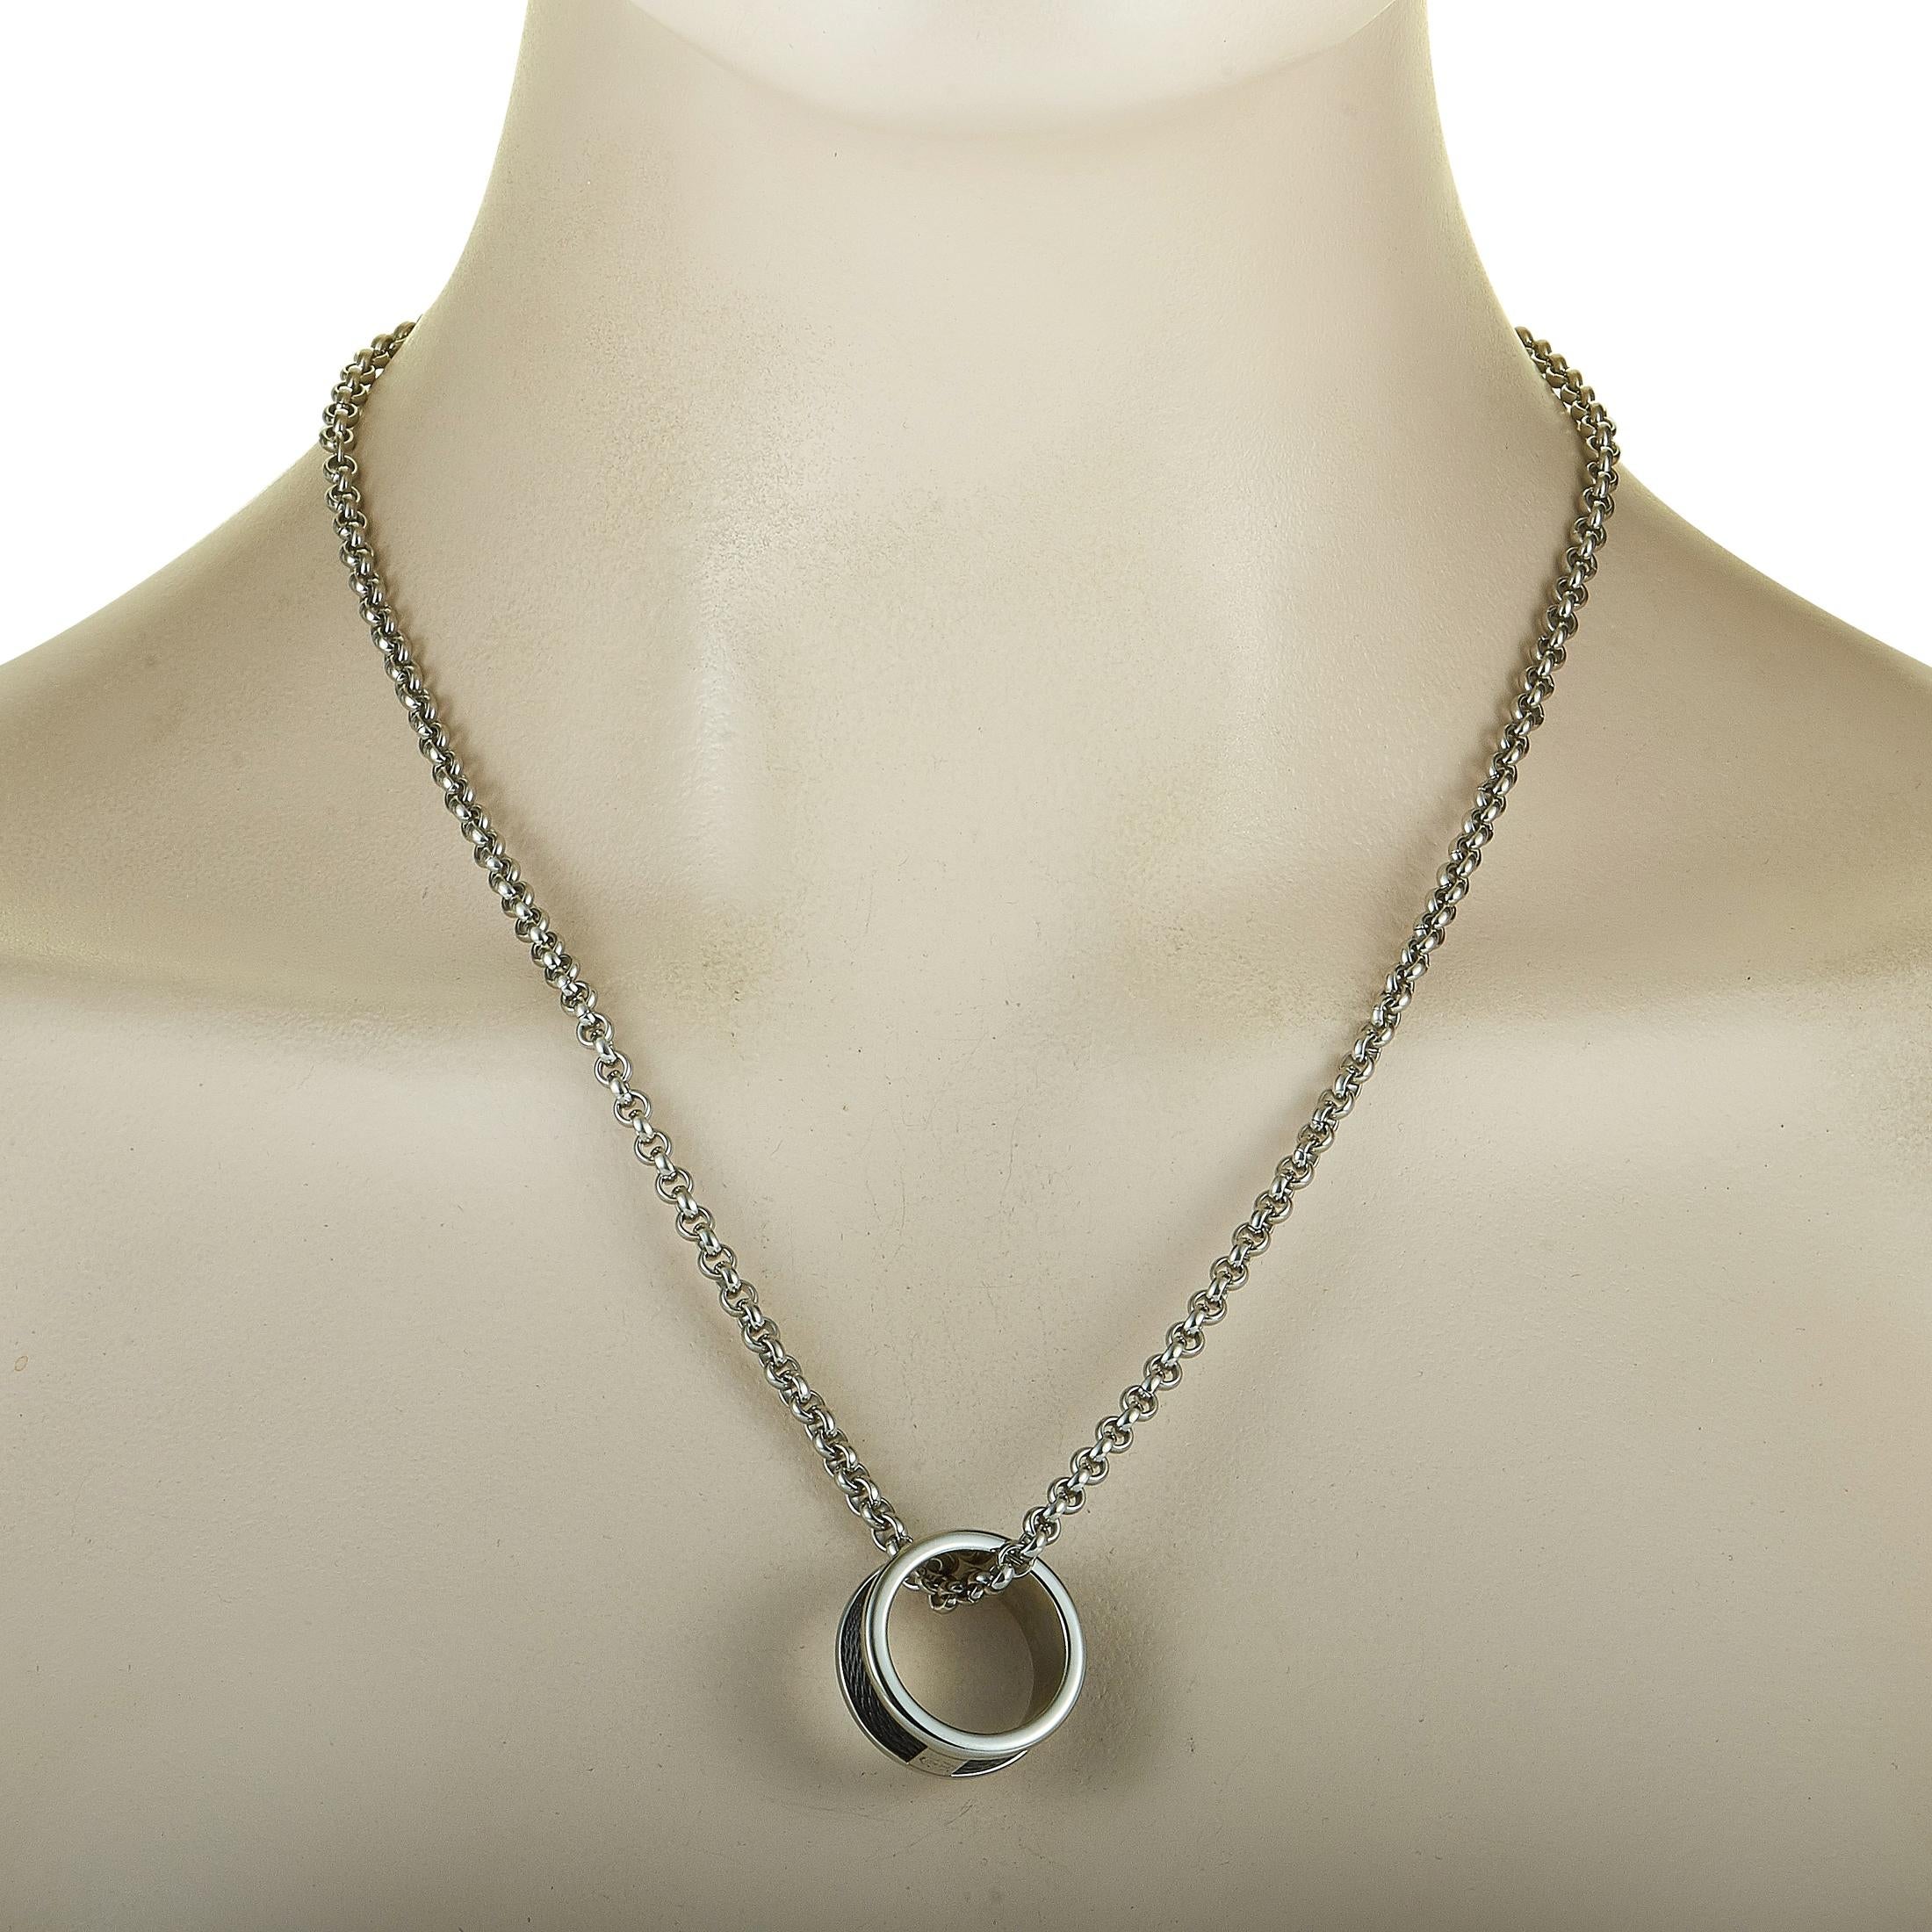 The Charriol “Forever” necklace is presented with a 22” stainless steel chain and a black PVD-plated stainless steel pendant that can also be worn as a ring. The pendant measures 0.90” in length and 0.90” in width and boasts band thickness of 9 mm.